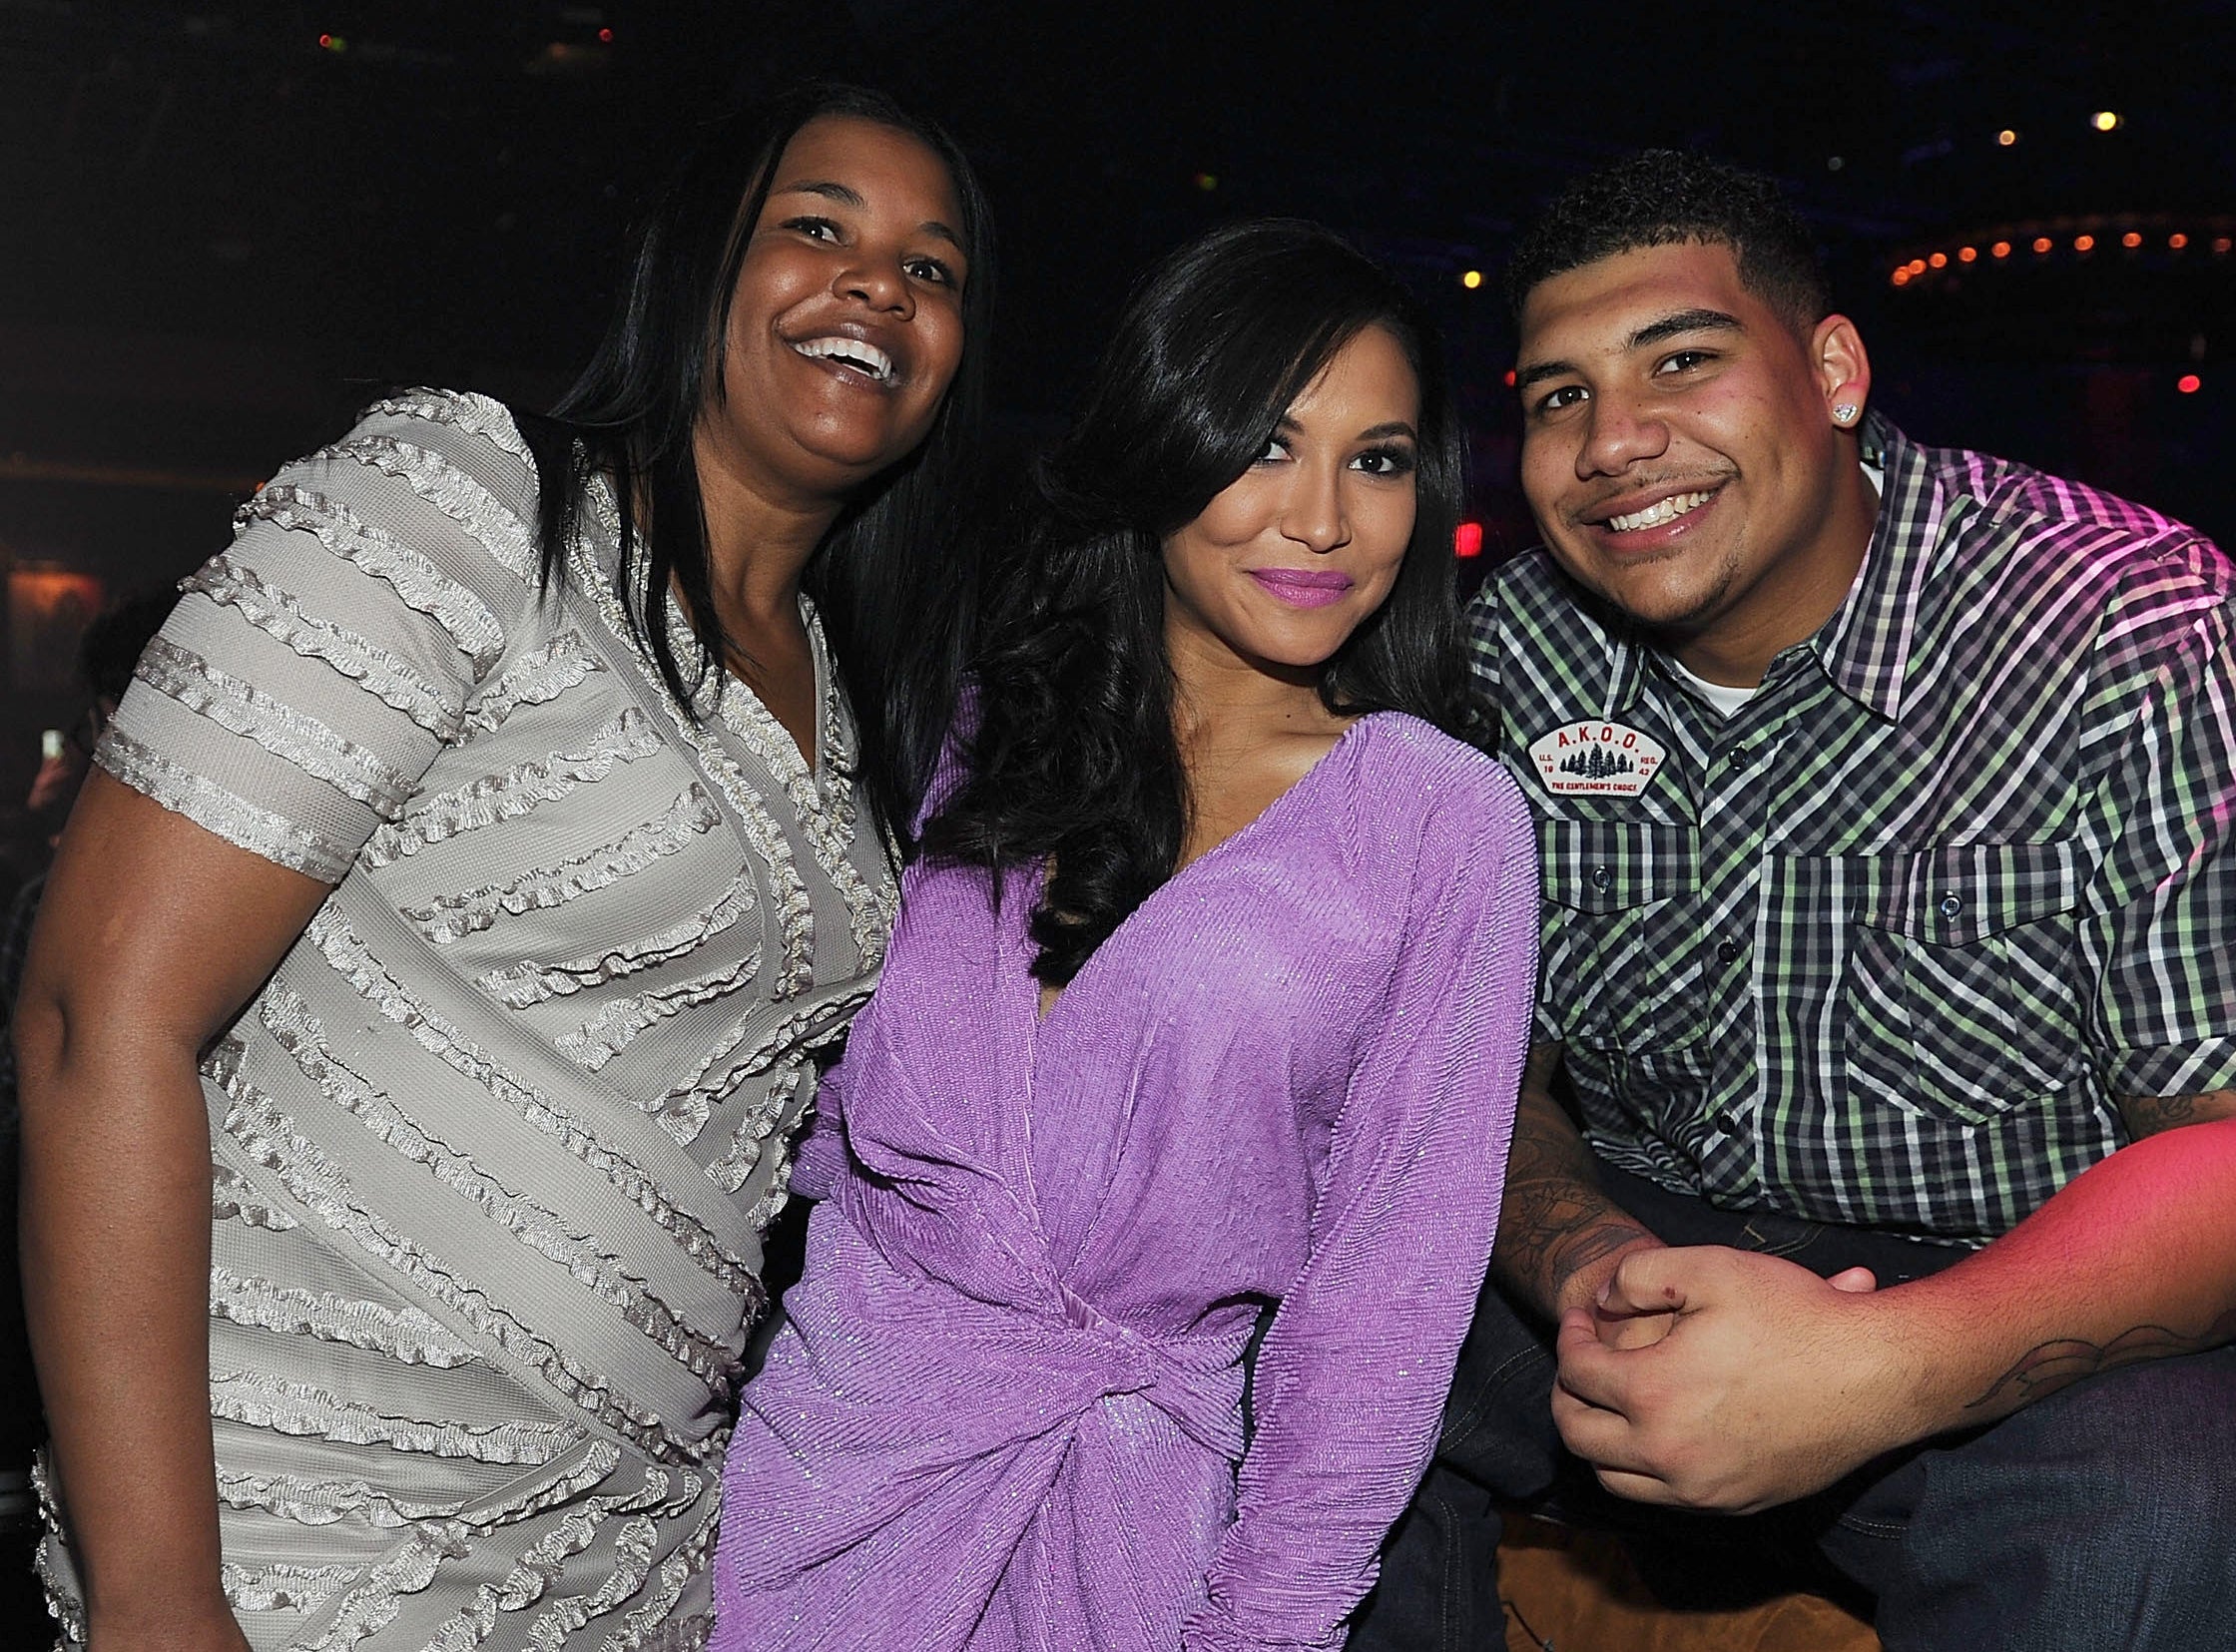 Naya posing with family members at a birthday party